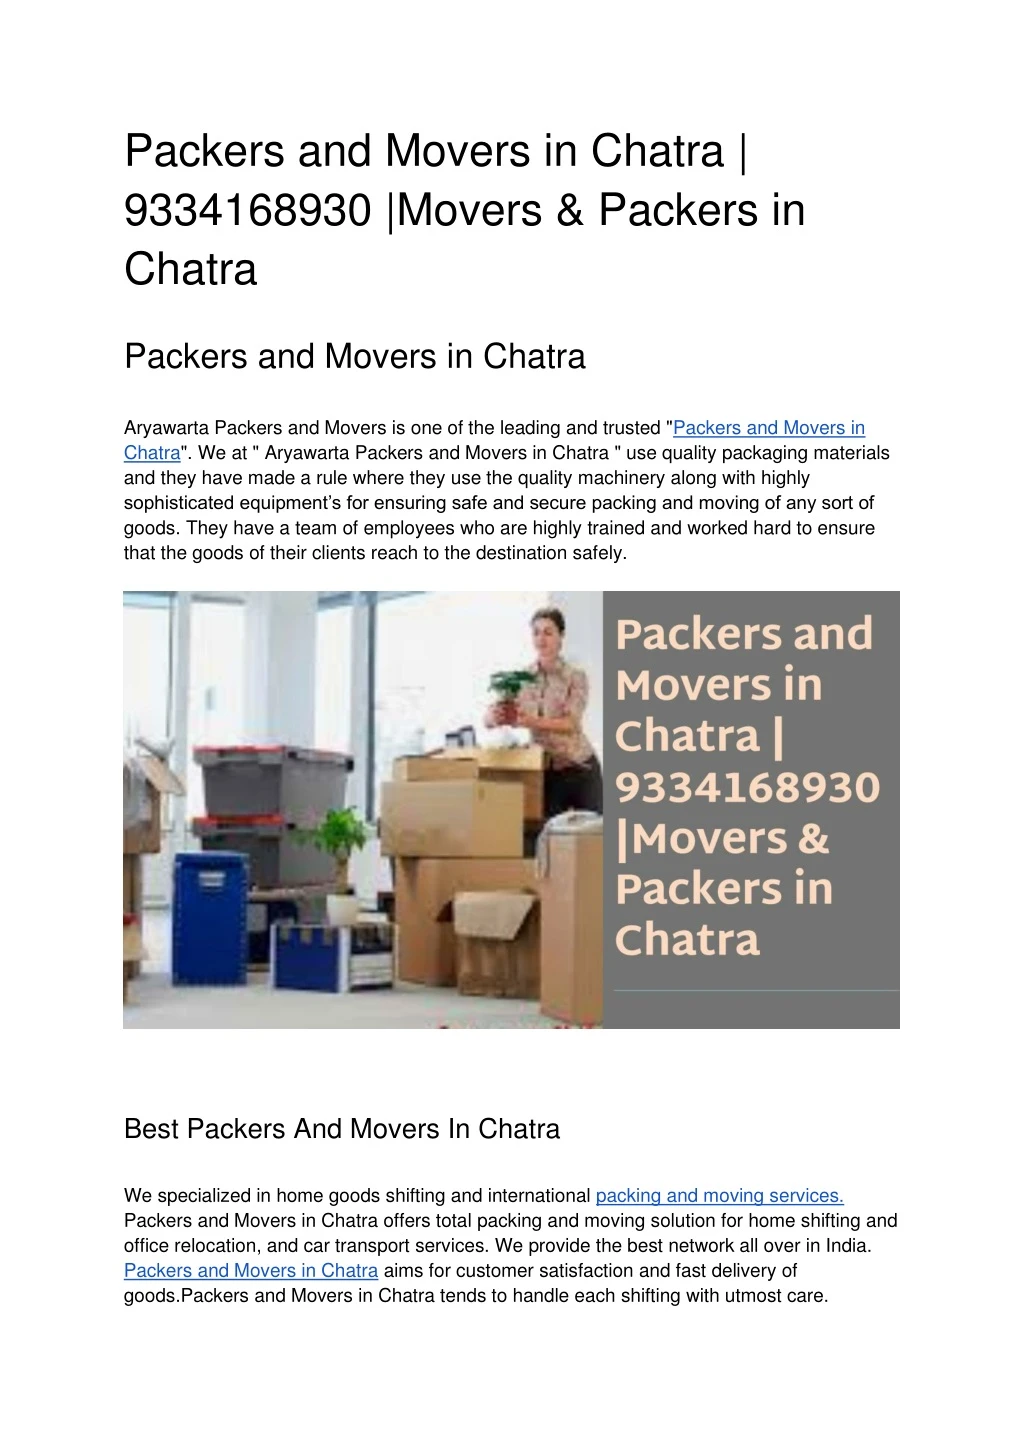 packers and movers in chatra 9334168930 movers